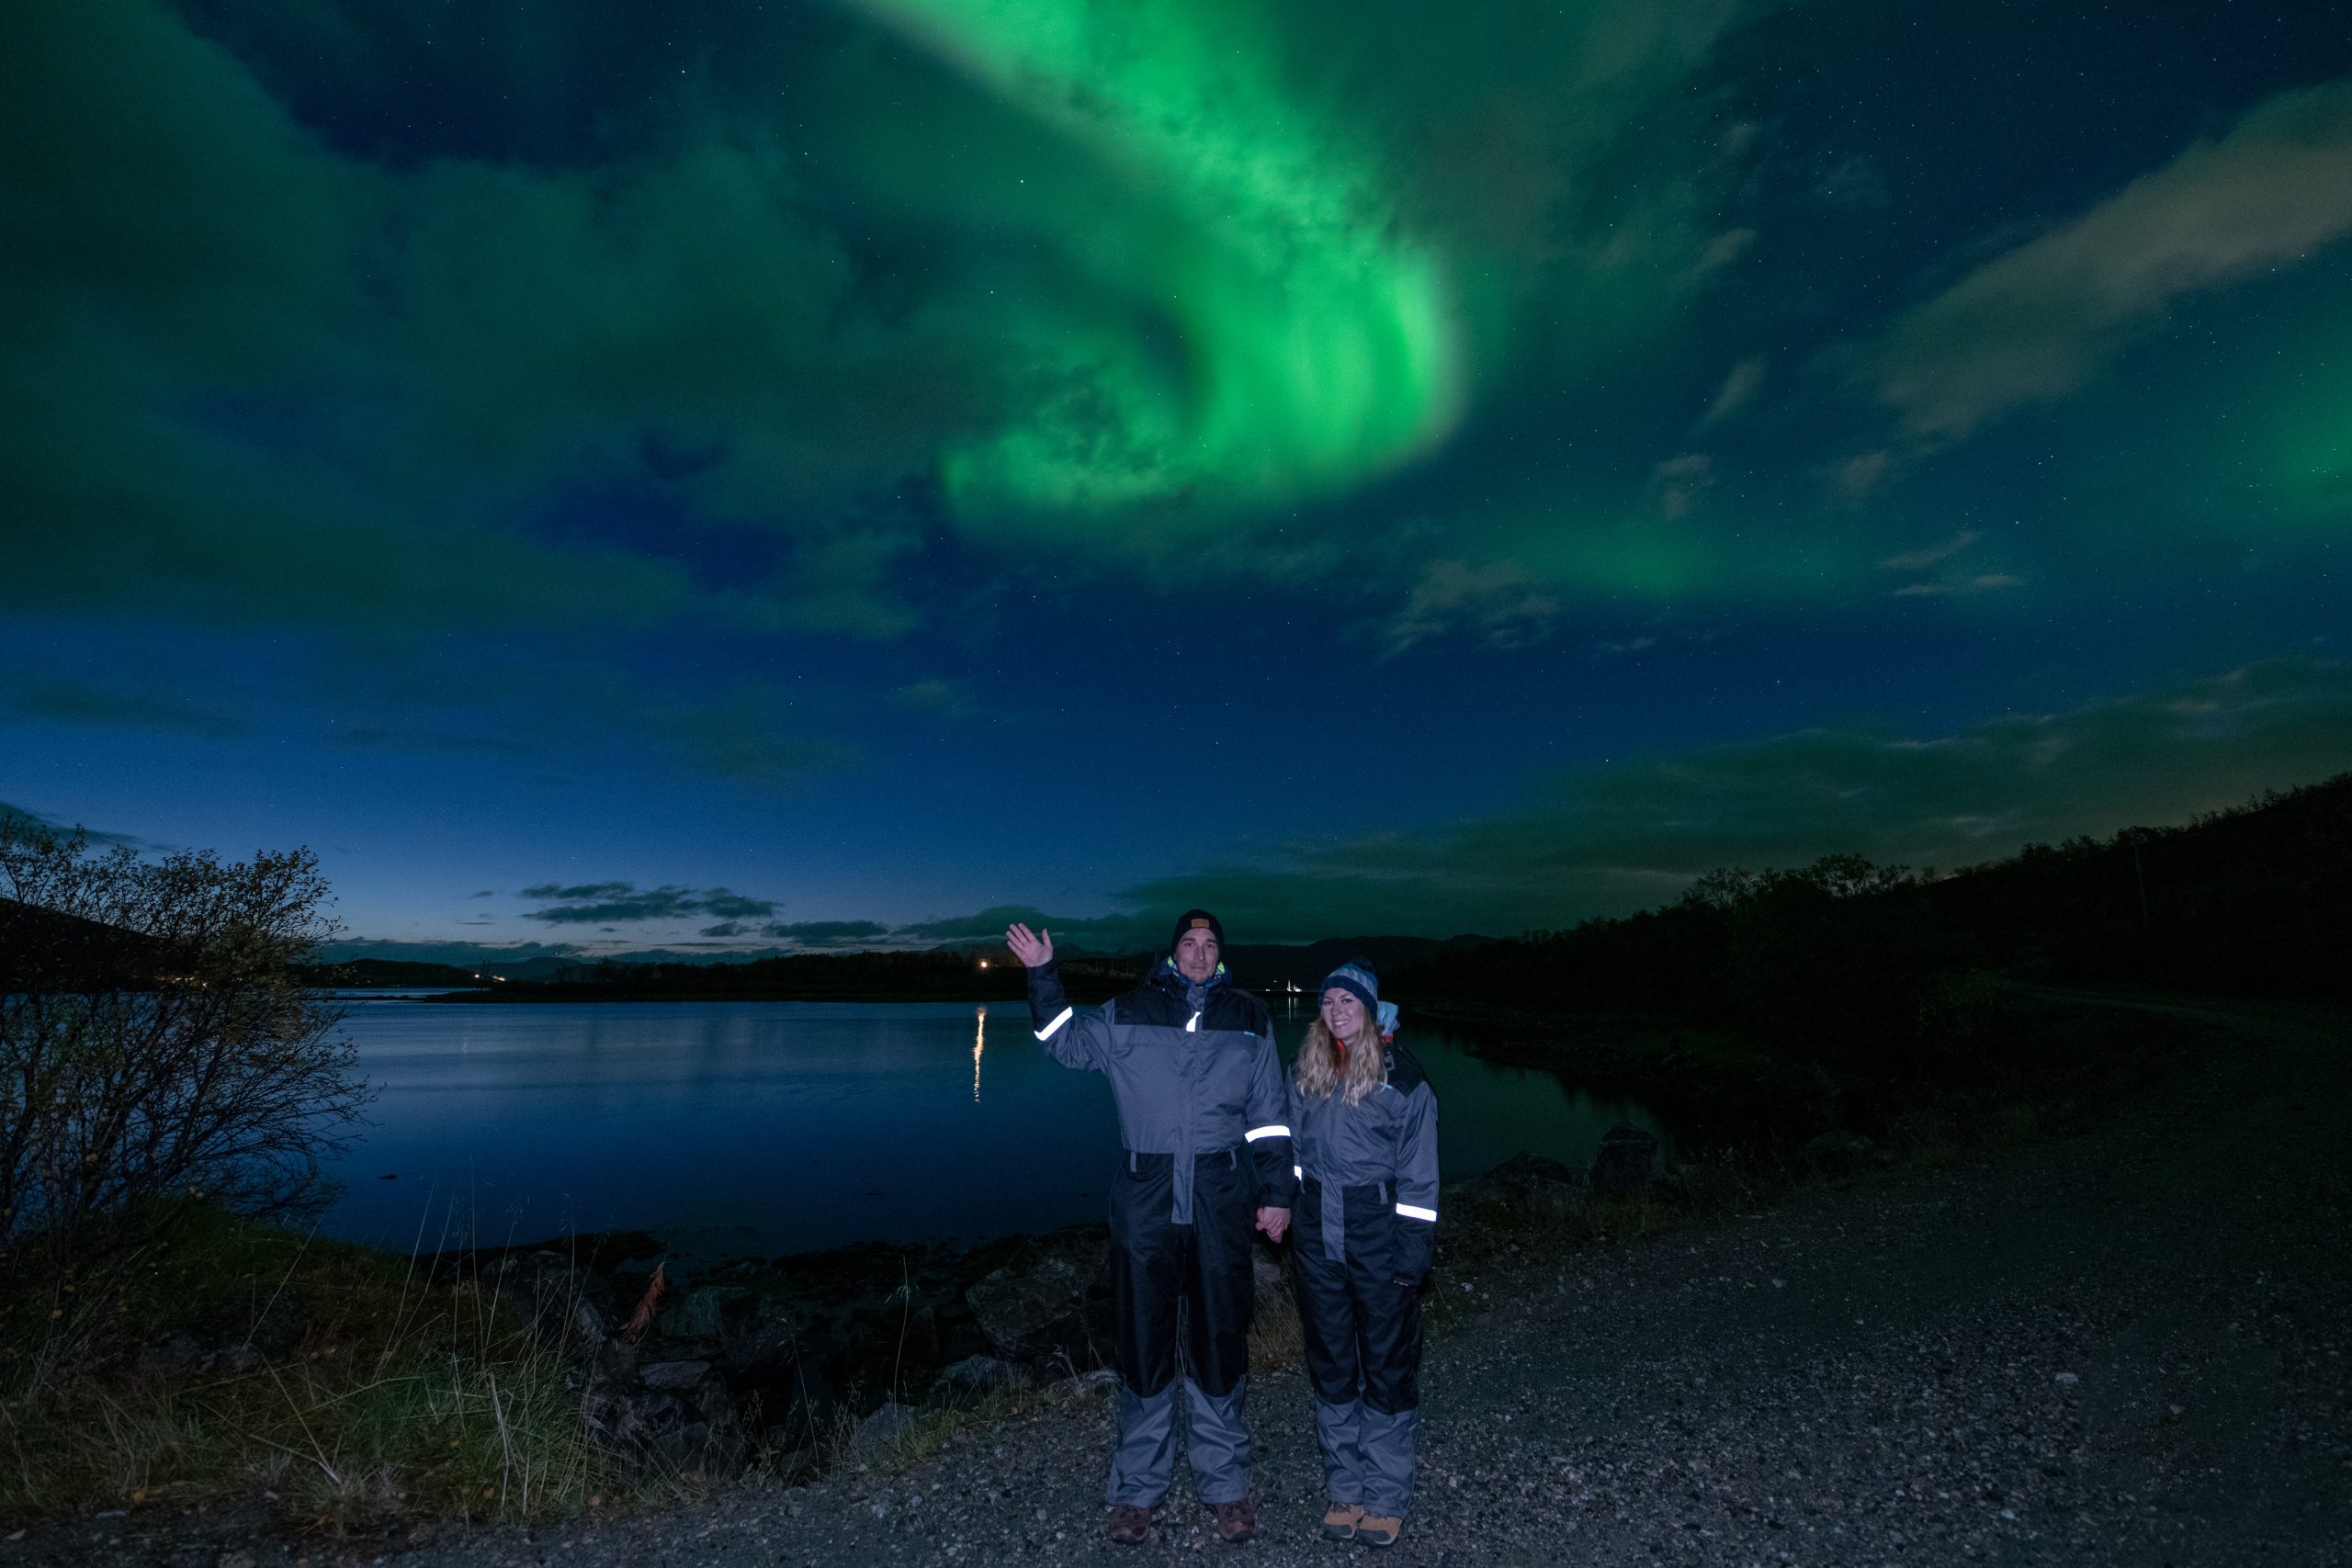 Cory and Gergely on an adventure to chase the northern lights in Norway